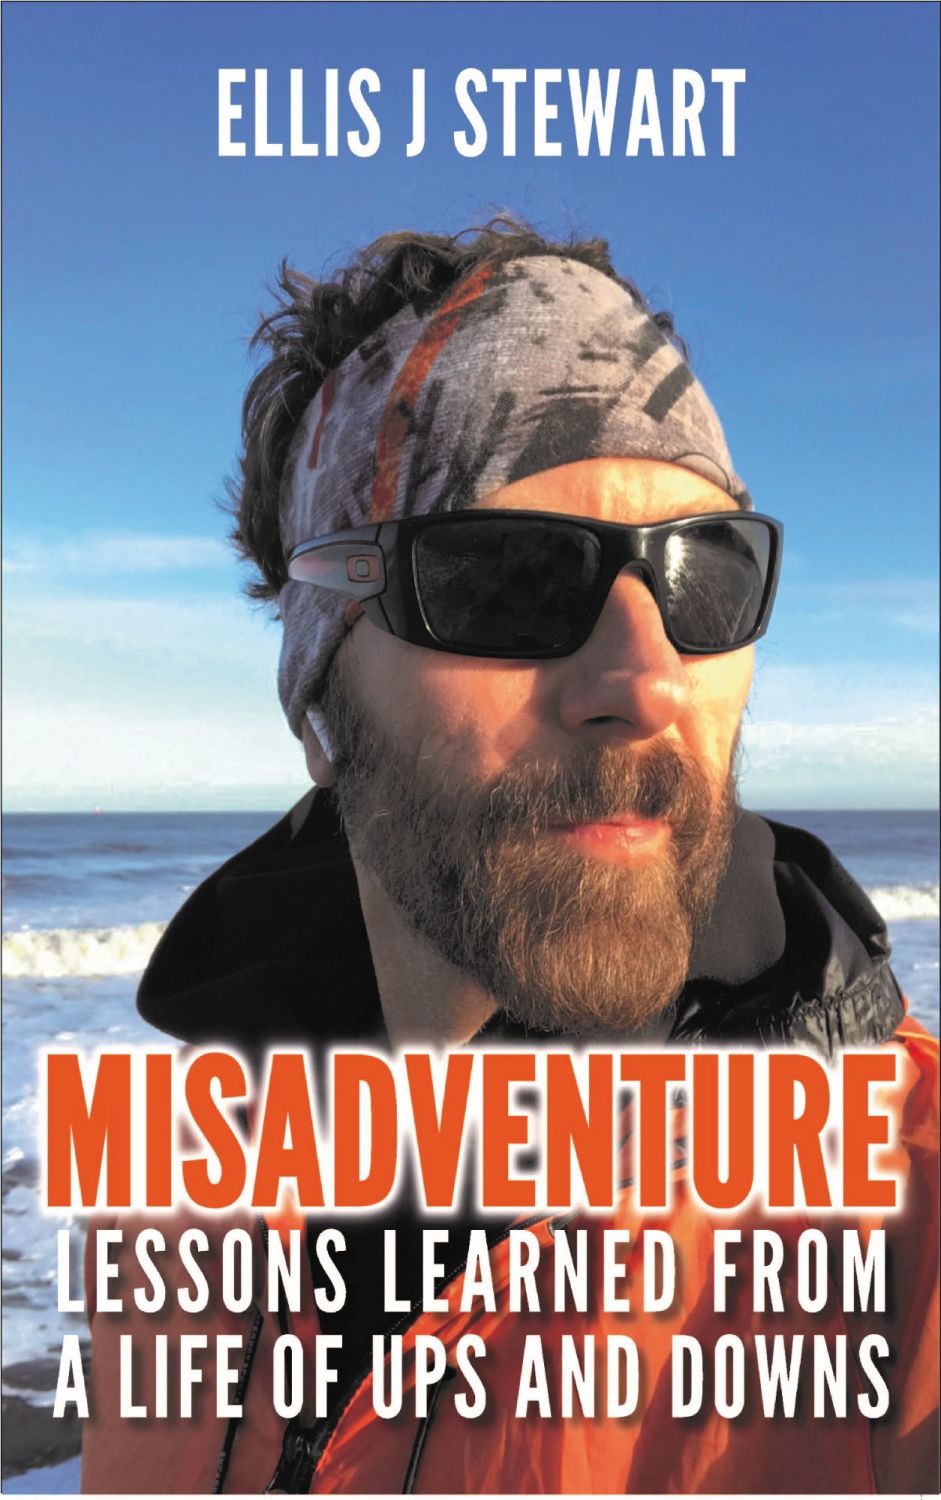 Misadventure. Lessons Learned From a Life of Ups and Downs. Hardback editio